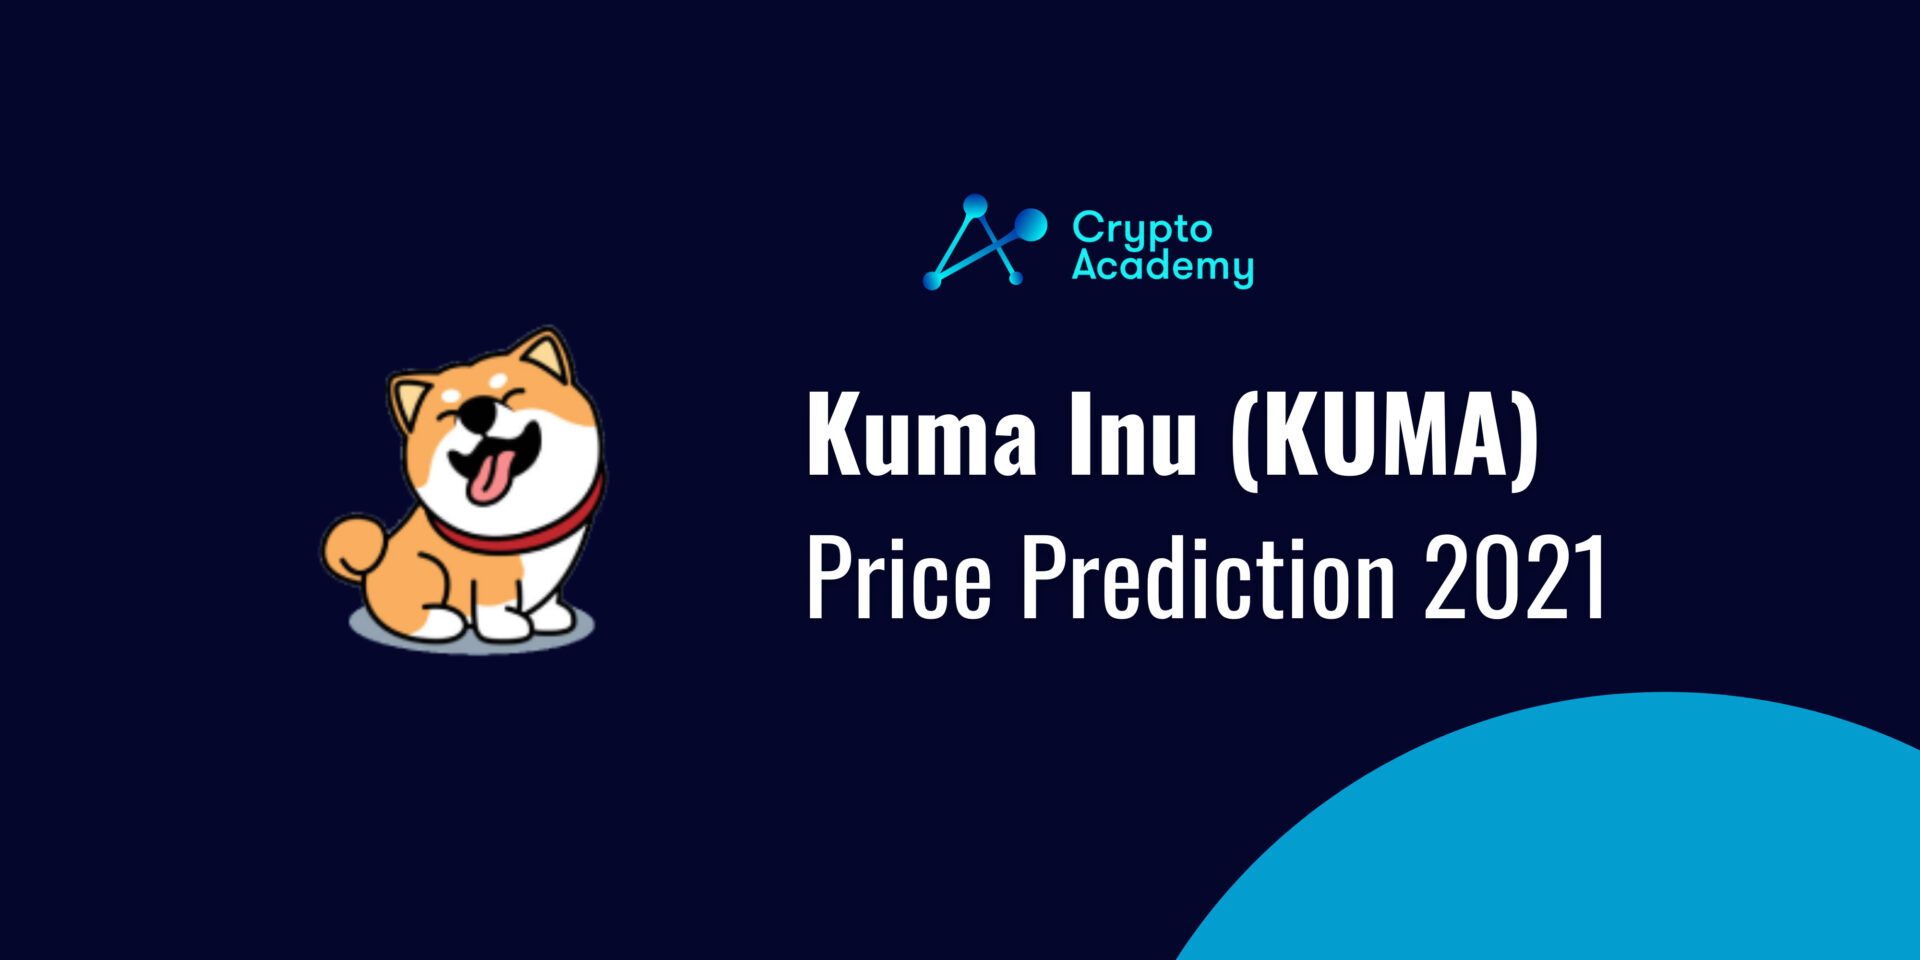 Kuma Inu Price Prediction 2021 - What Will KUMA Price be by the End of 2021?